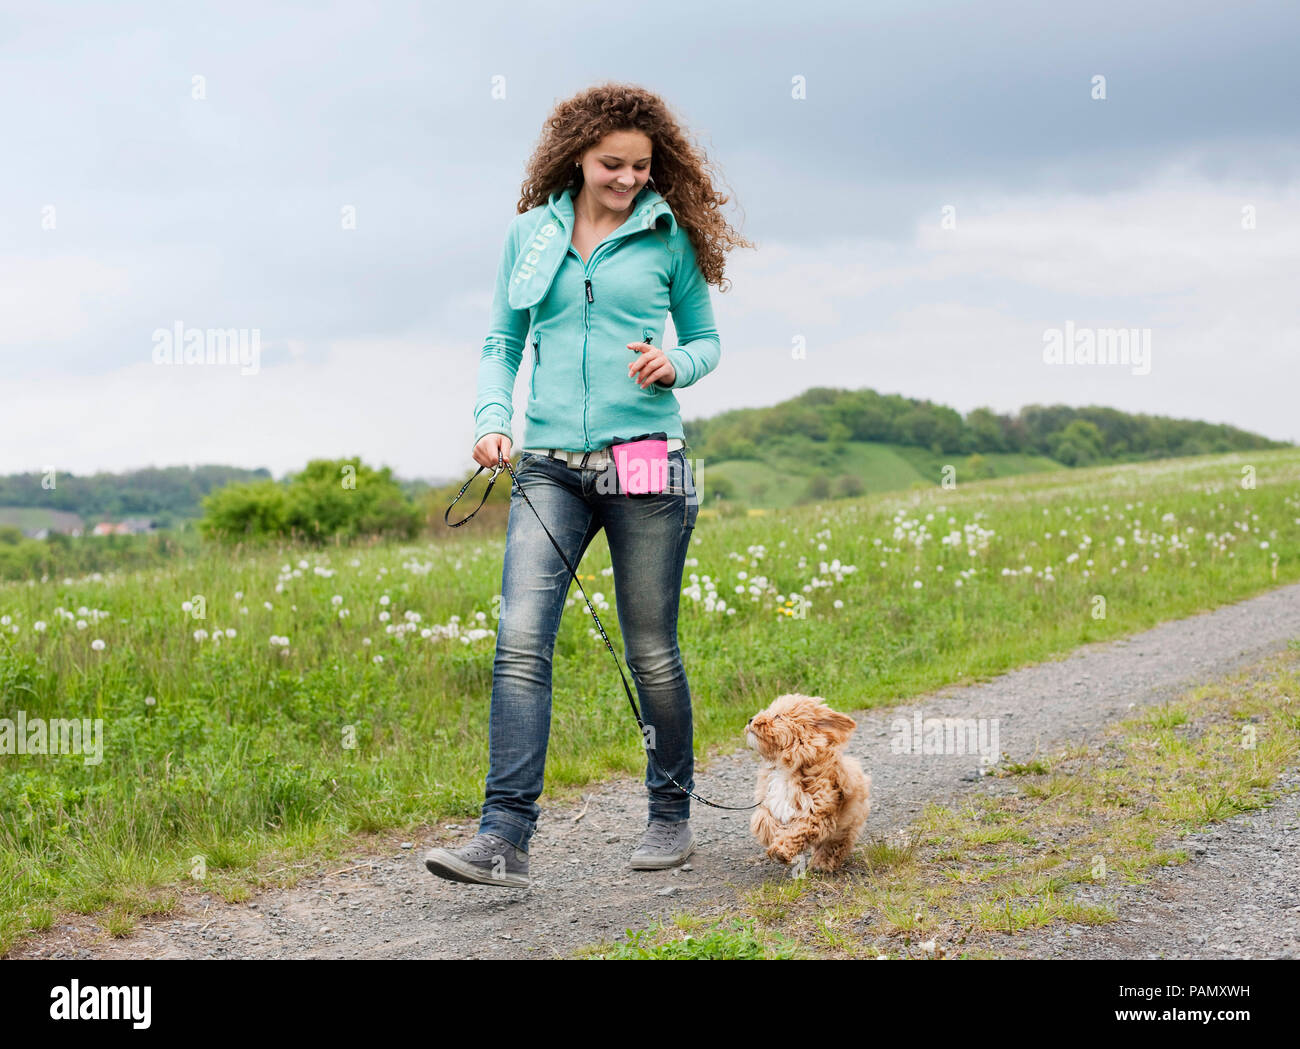 Havanese. Puppy walking next to a woman, looking up. Germany Stock Photo